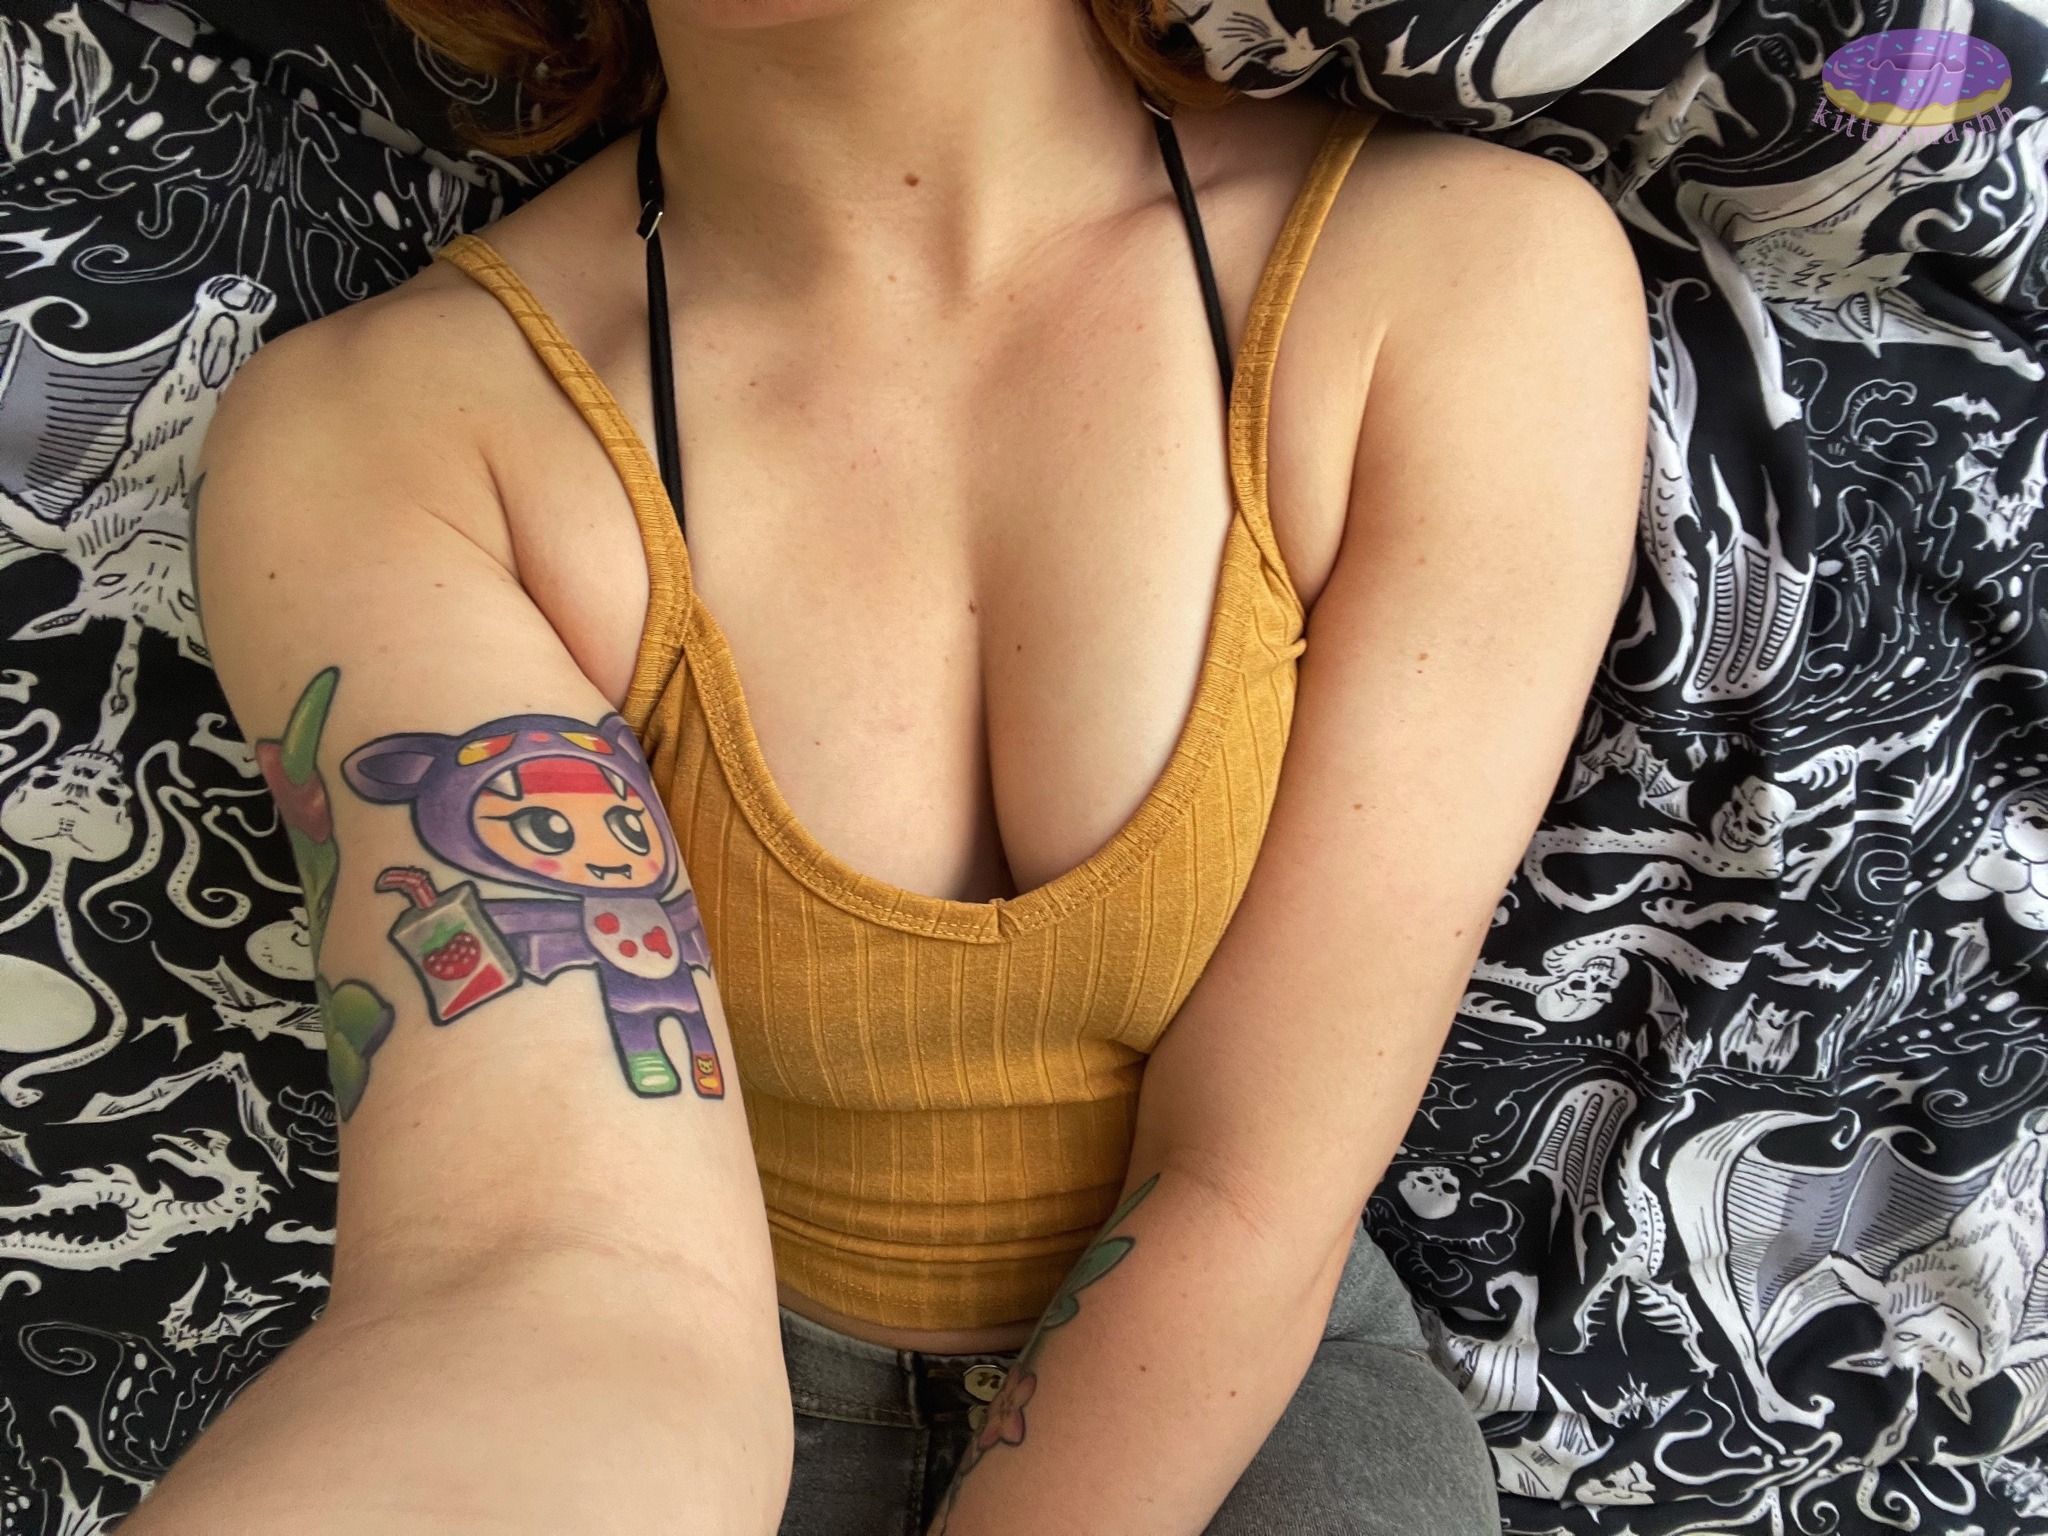 kittysmashh:My hugging muscles are Pumped adult photos